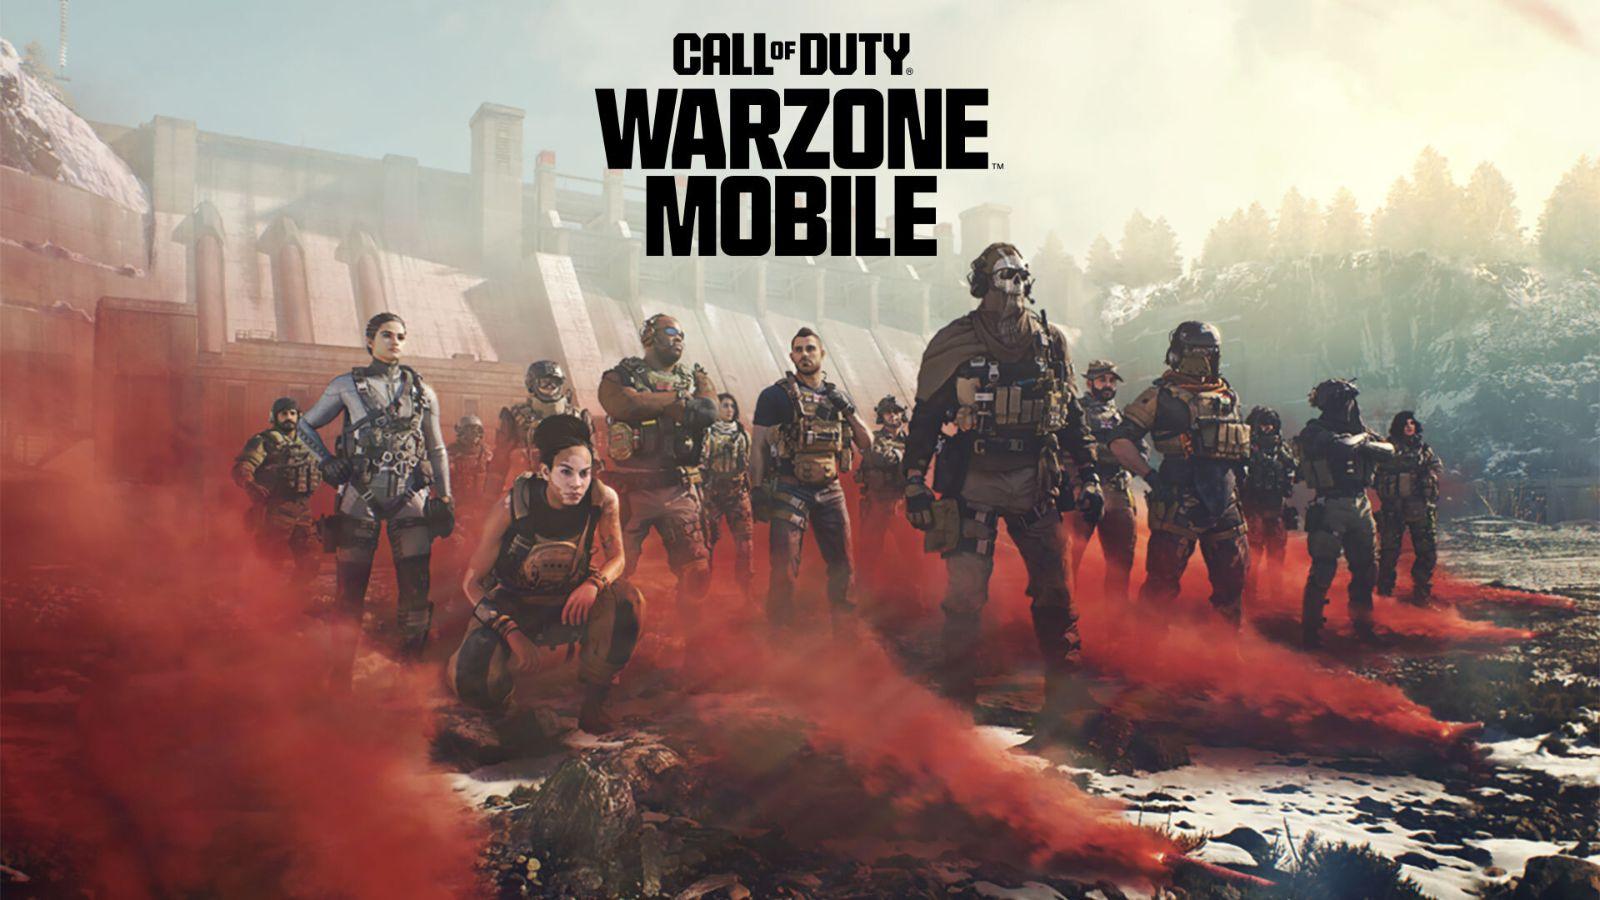 Warzone Mobile News on X: Call of Duty®: Warzone™ Mobile is